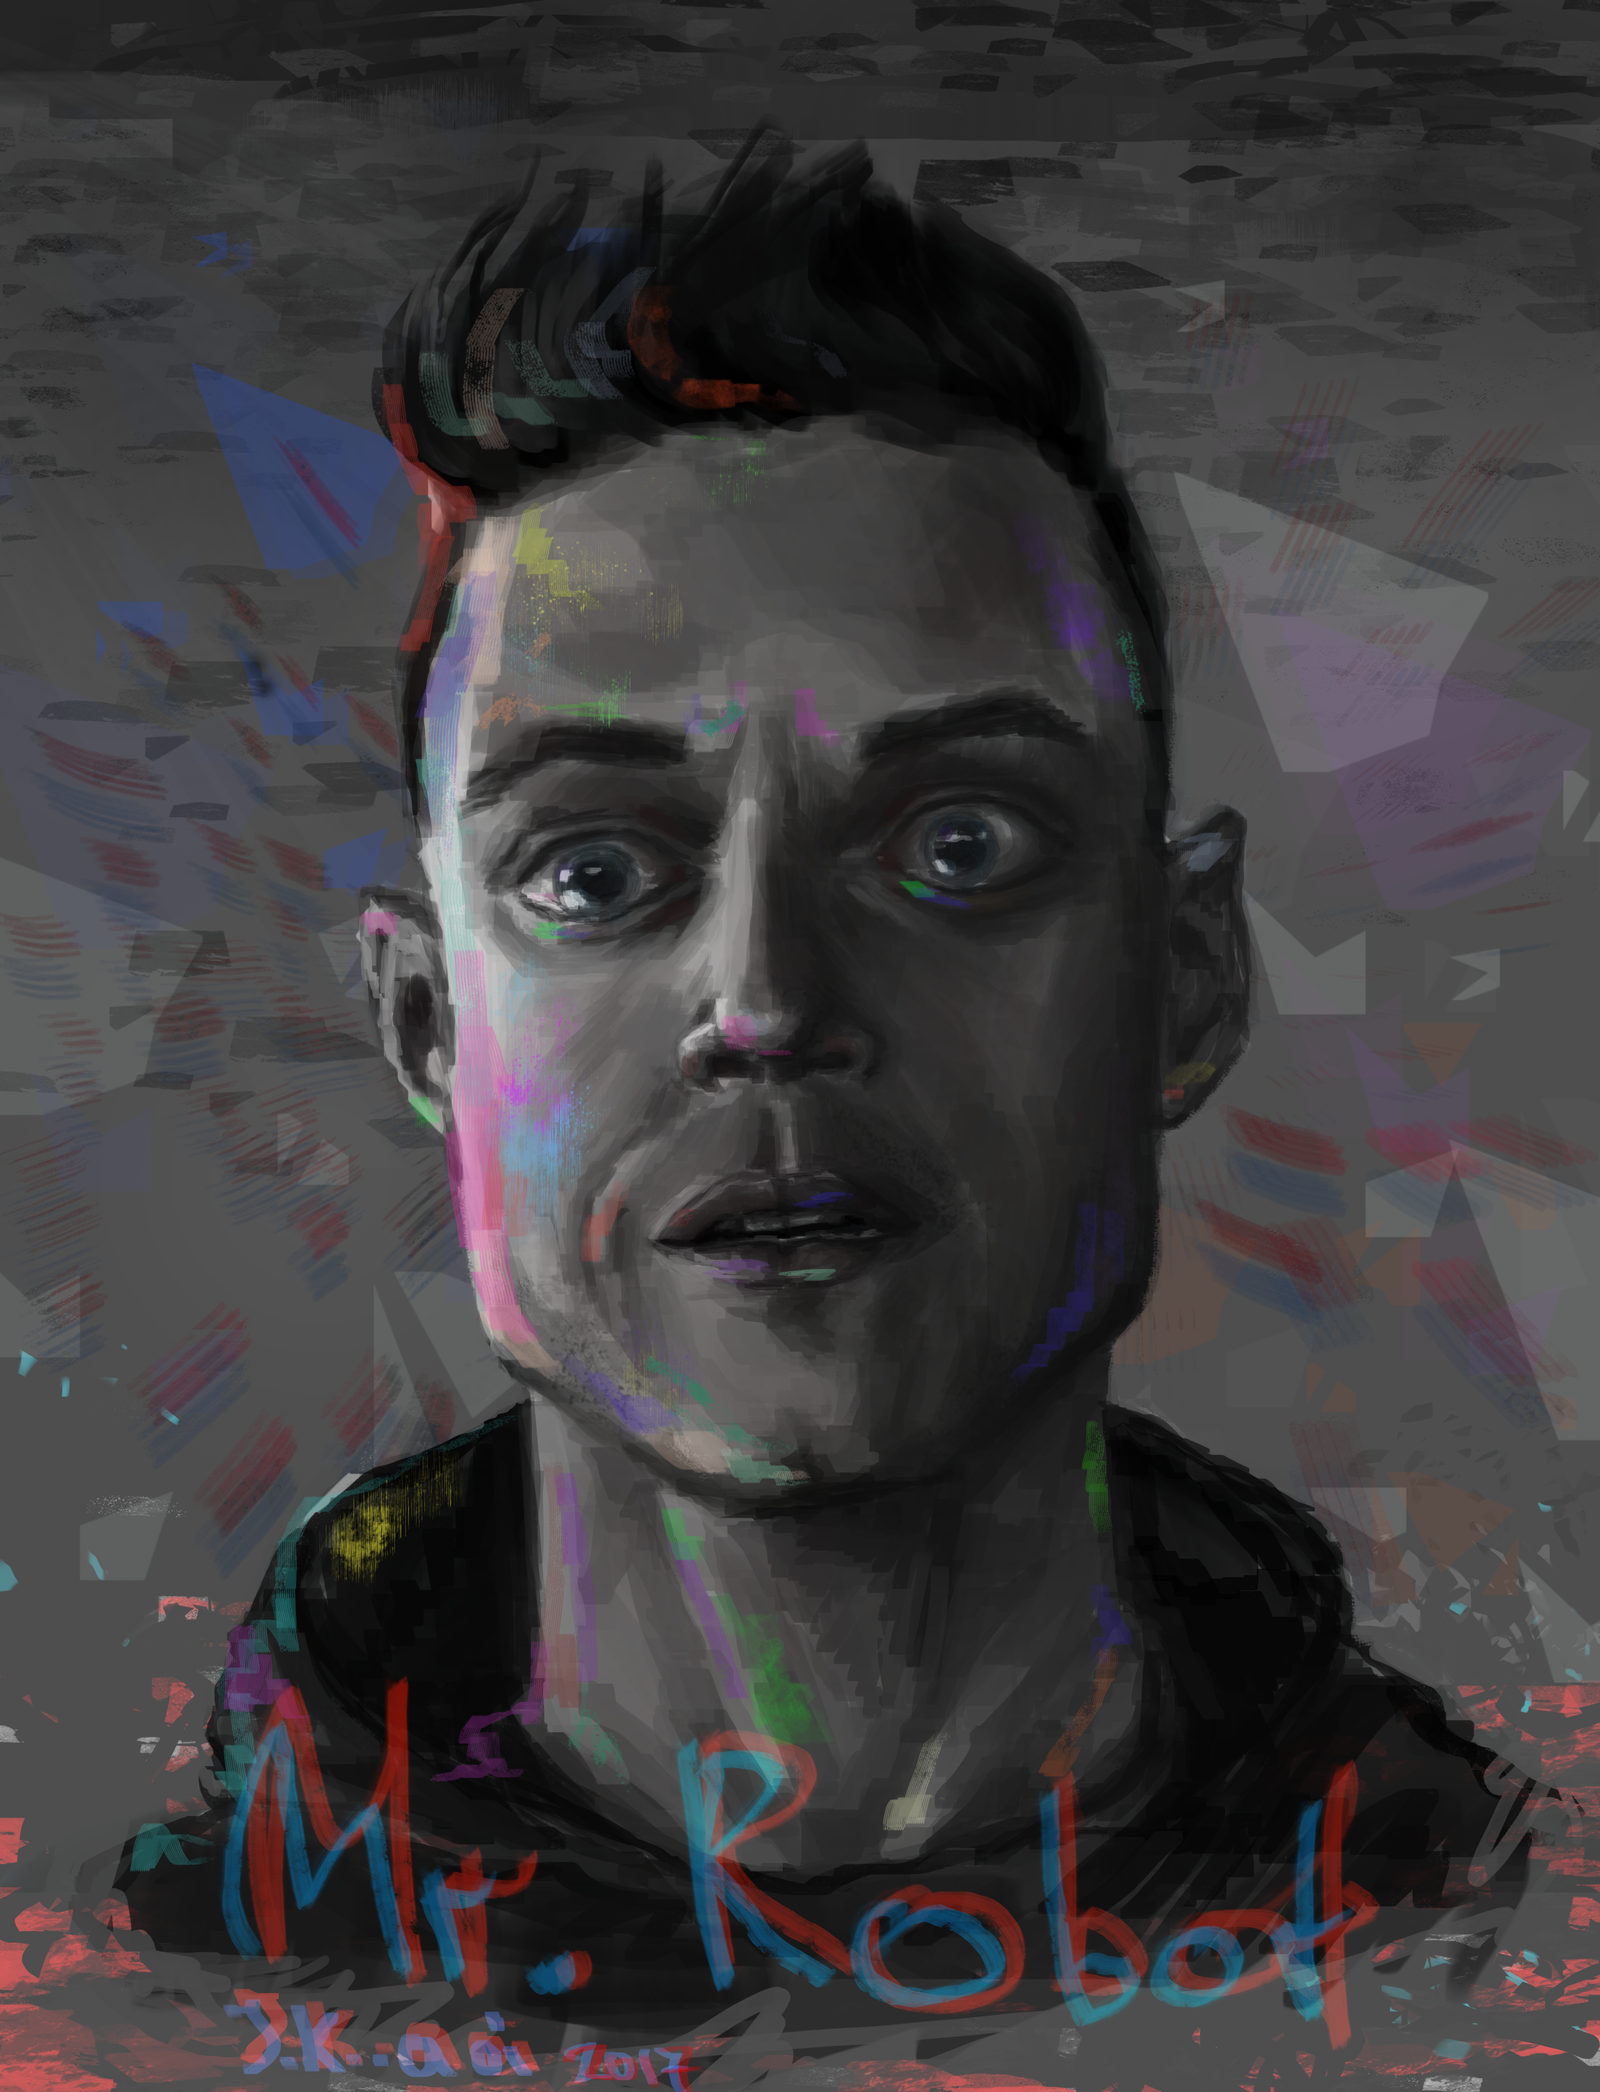 Mr. Robot - , Photoshop, My, Mr Robot, Fsociety, Serials, Art, Computer graphics, Drawing